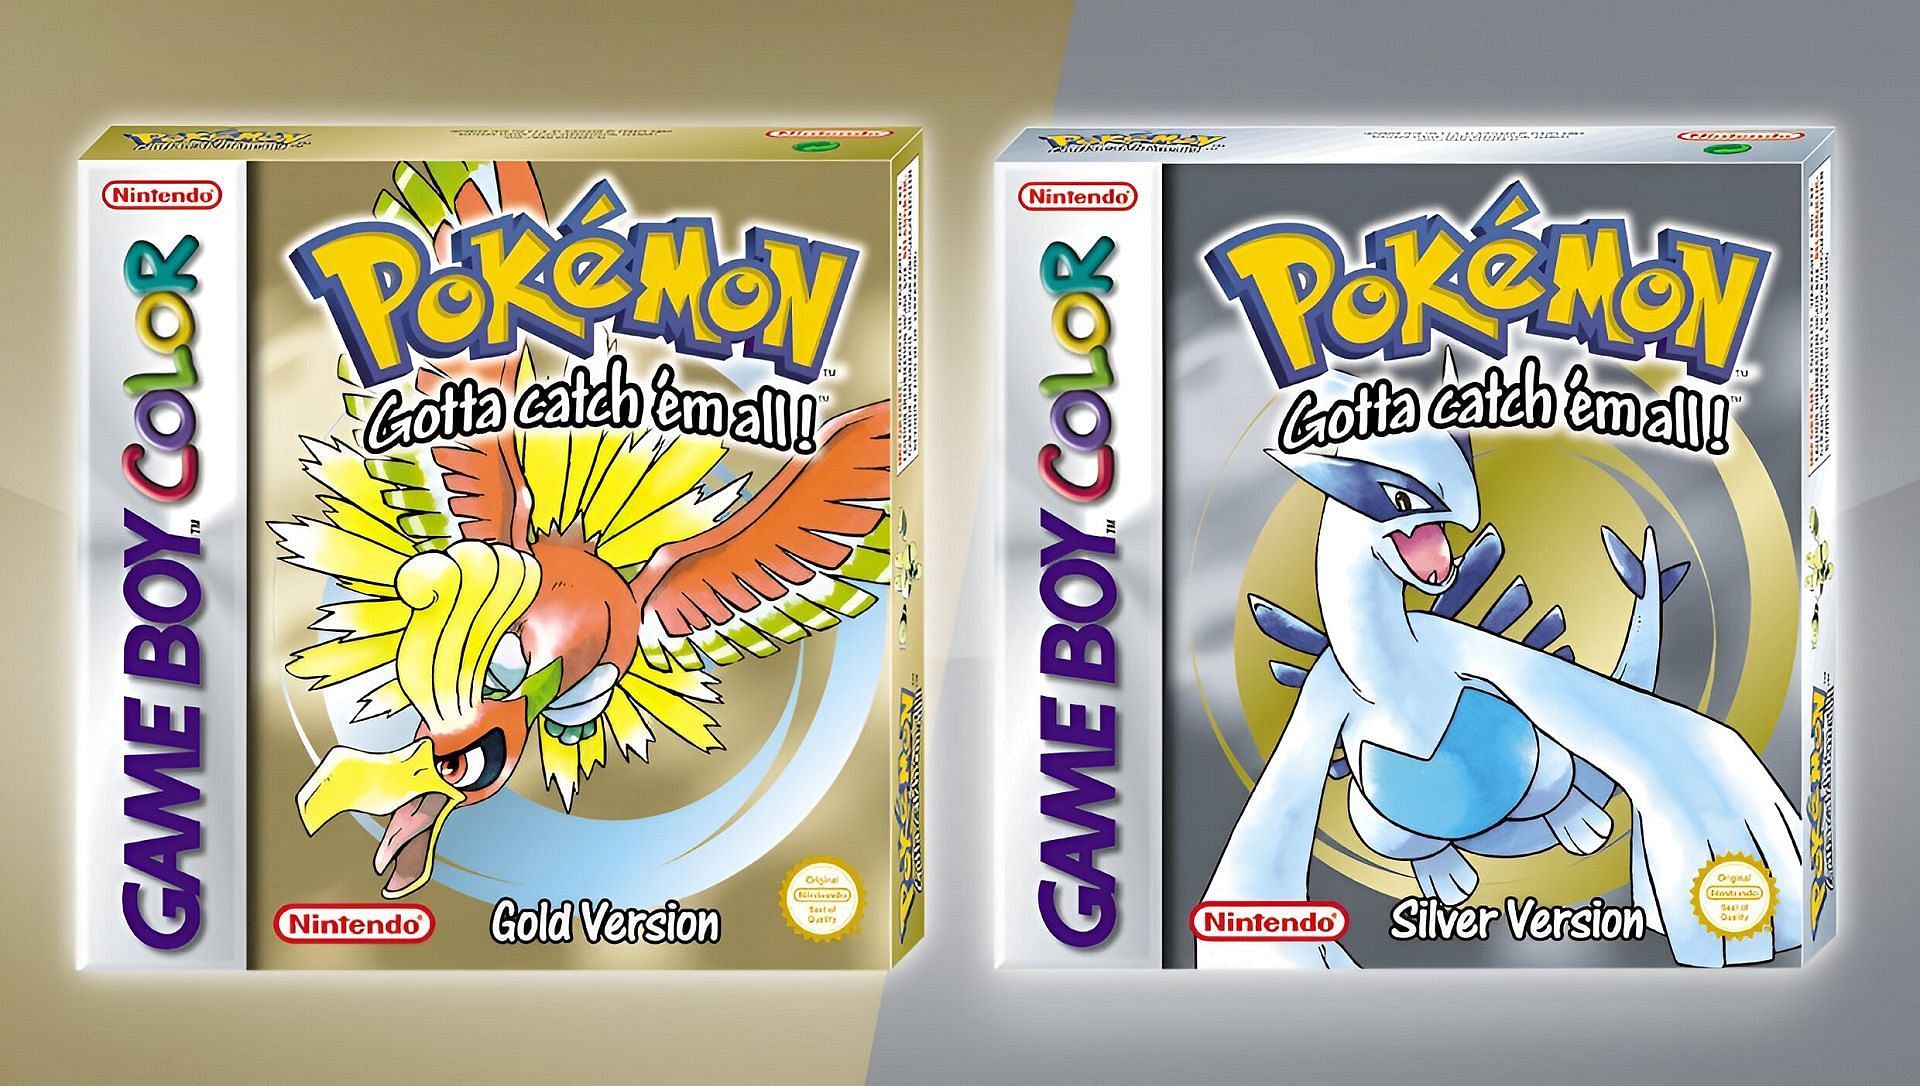 What is the best team composition for Pokemon Gold and Silver on the Game Boy Color?